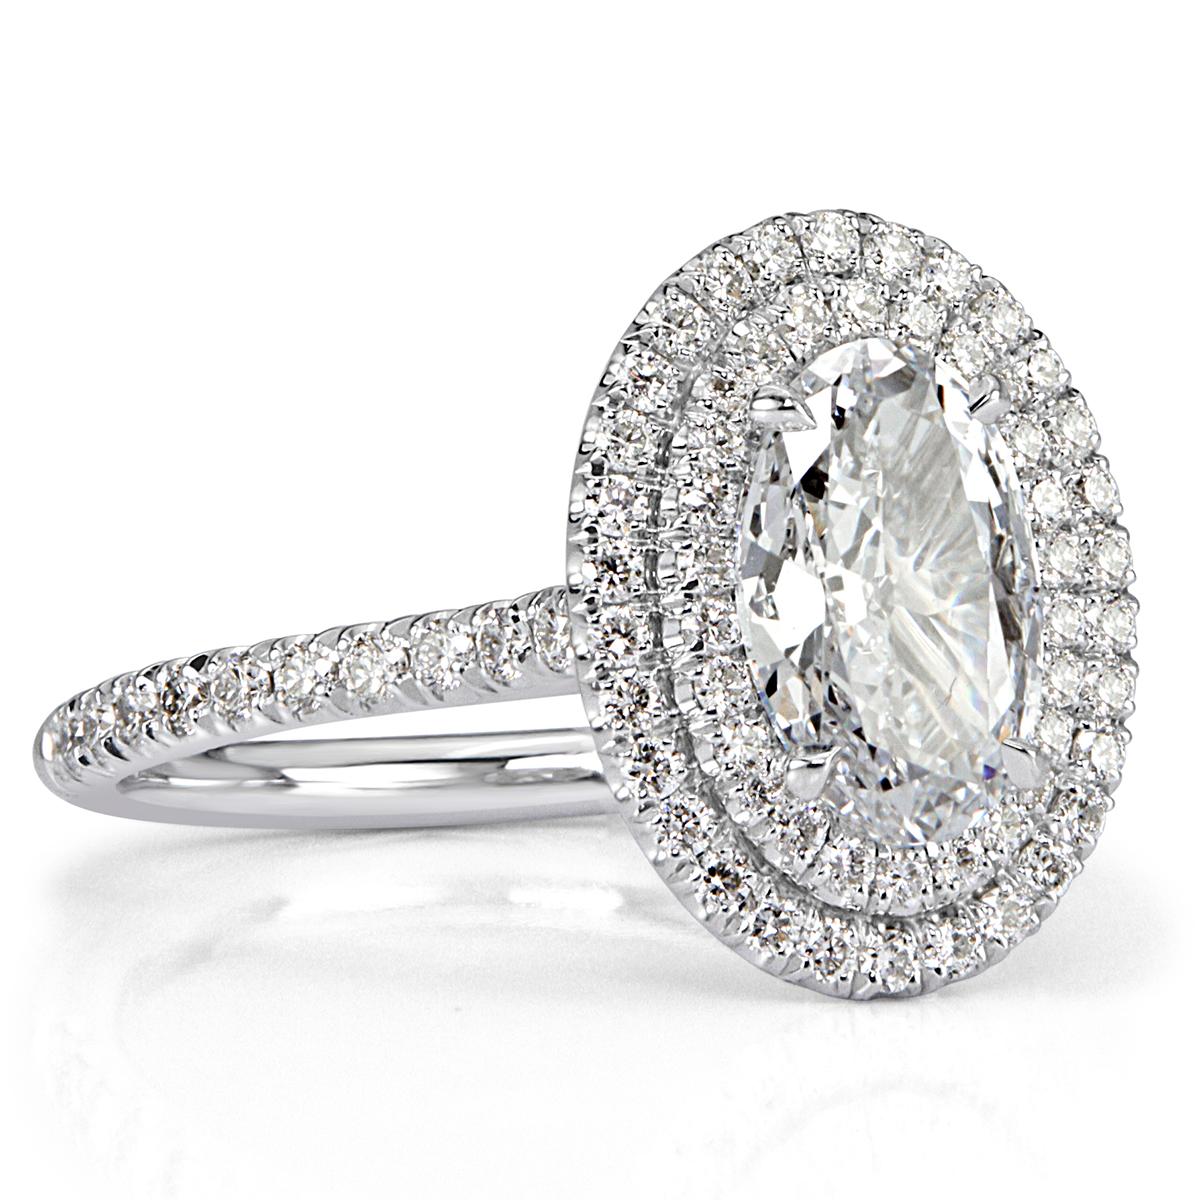 This beautiful oval cut diamond engagement ring features a 1.01ct oval cut center diamond, GIA certified at E-SI1. It is surrounded by a gorgeous double halo of round brilliant cut diamonds as well as dazzling diamonds micro pavé set down the